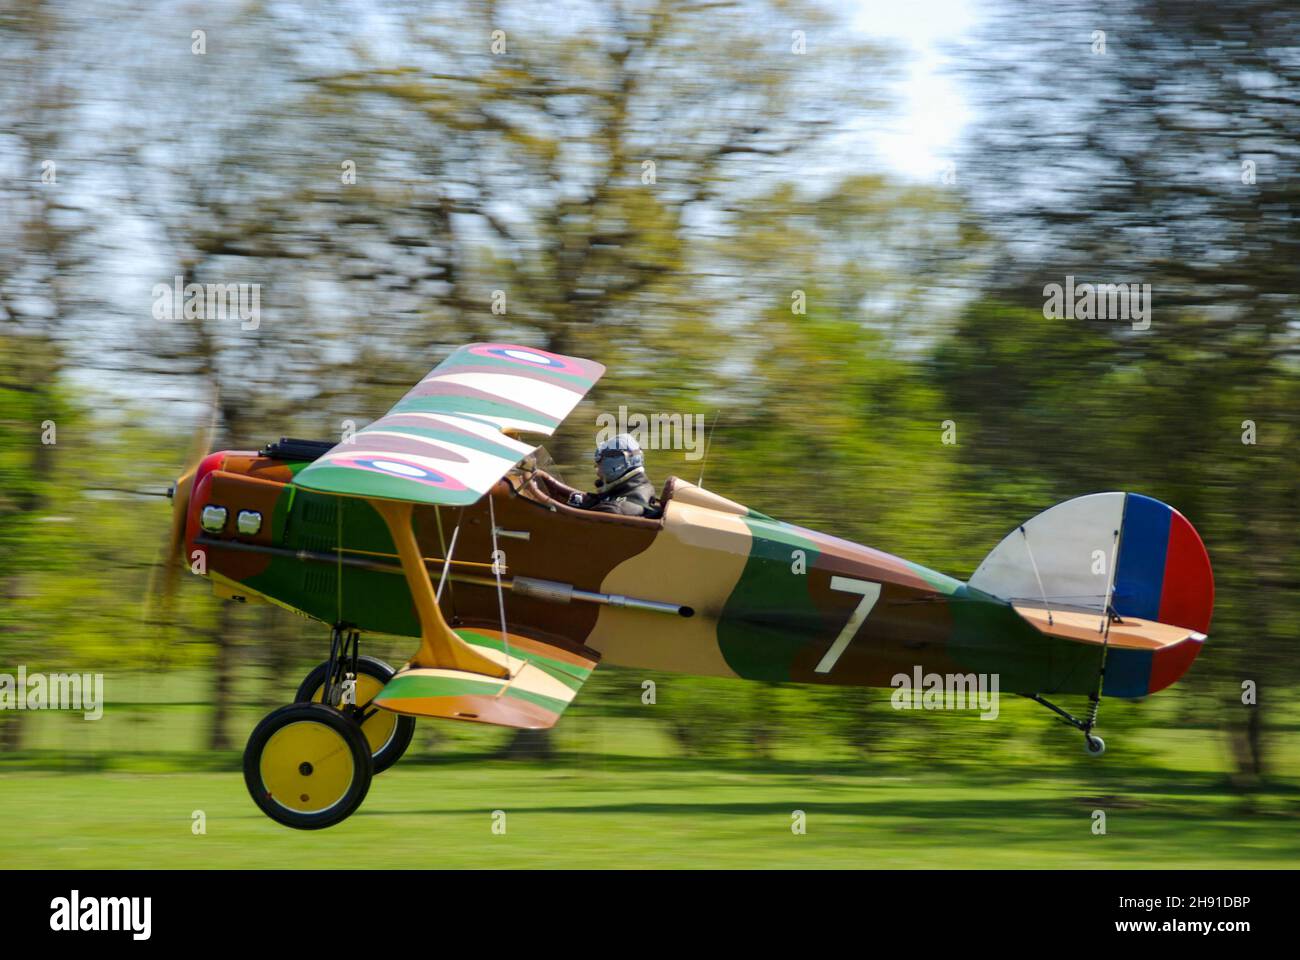 Wolf W-11 Boredom Fighter plane G-BMZK, a homebuilt light aircraft designed to resemble a first world war SPAD S.XIII biplane. Taking off from rural Stock Photo